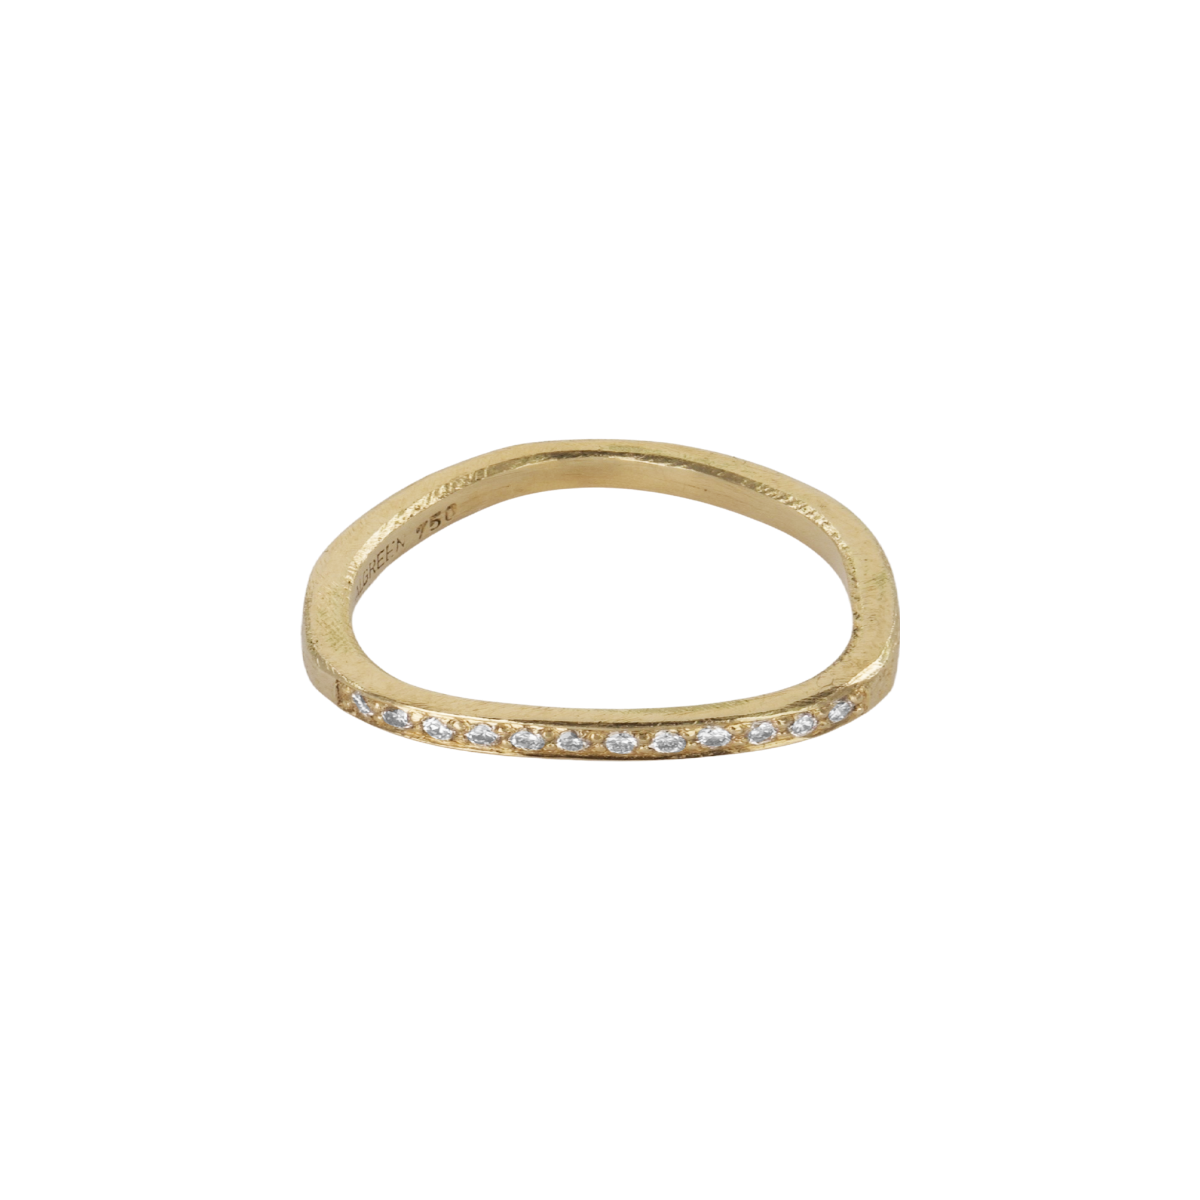 Eternity ring in 18kt. gold, with 12 small white diamonds